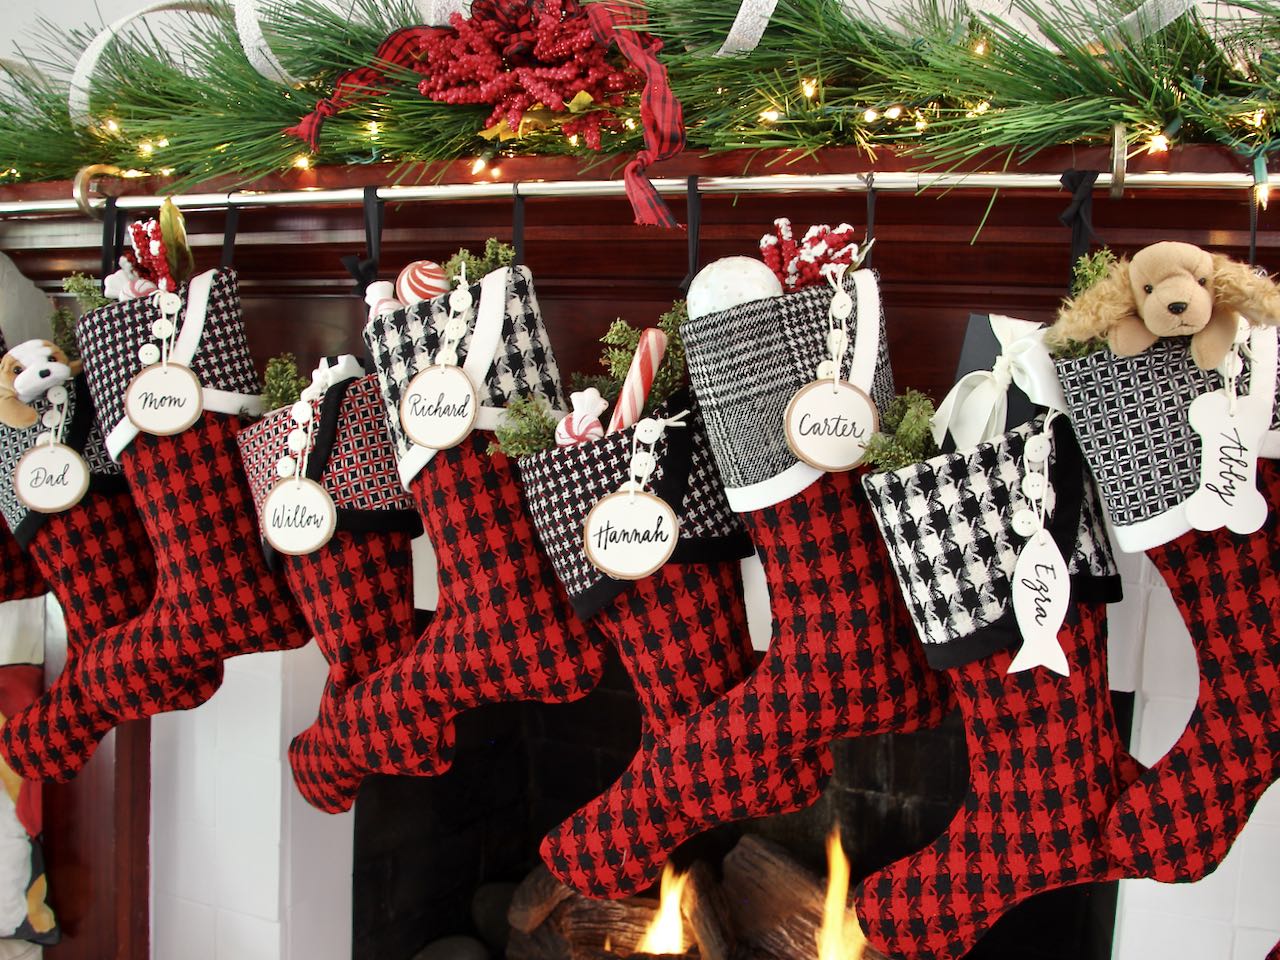 8 coordinating yet unique Christmas stockings are hanging from a mantel above a fire. White tree slice name tags hang from the top of three buttons on each cuff